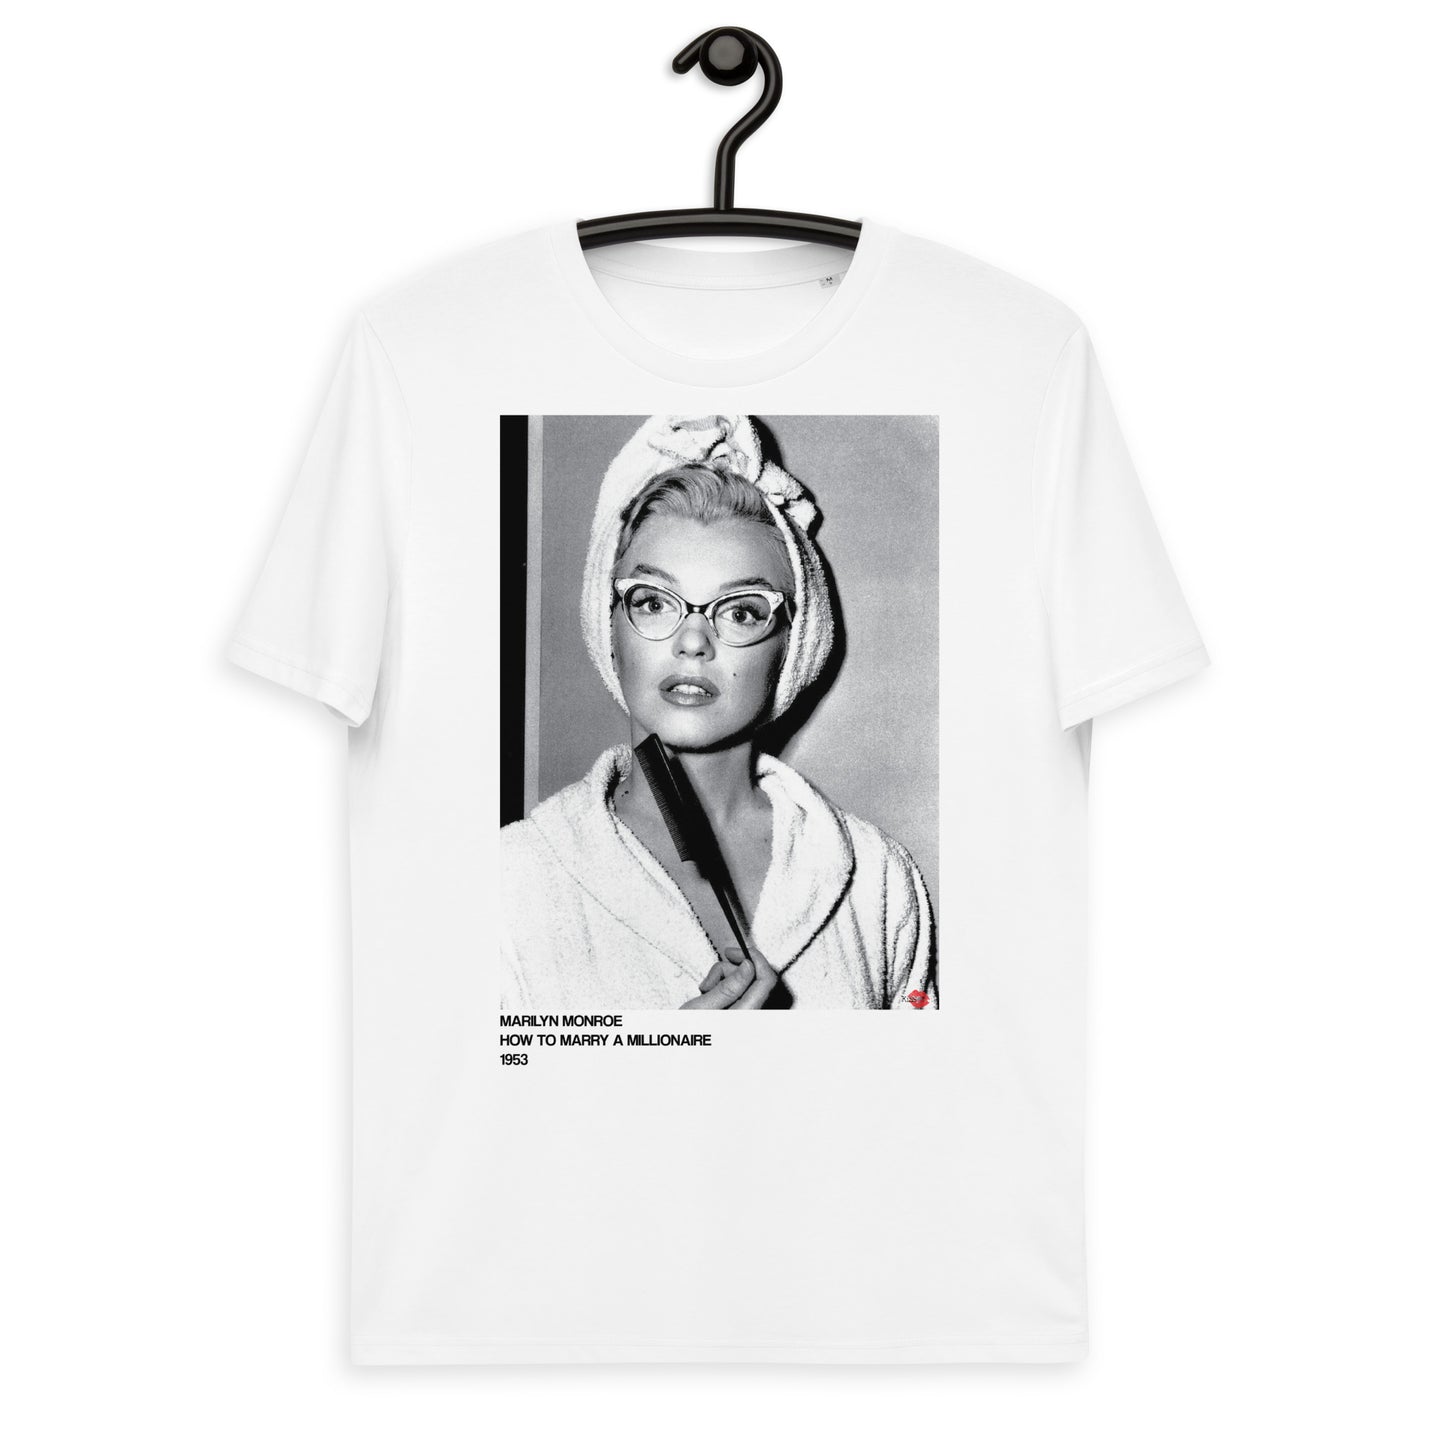 Marilyn Monroe 1953 KiSS Unisex organic cotton t-shirt - How To Marry a Millionaire inspired 50s